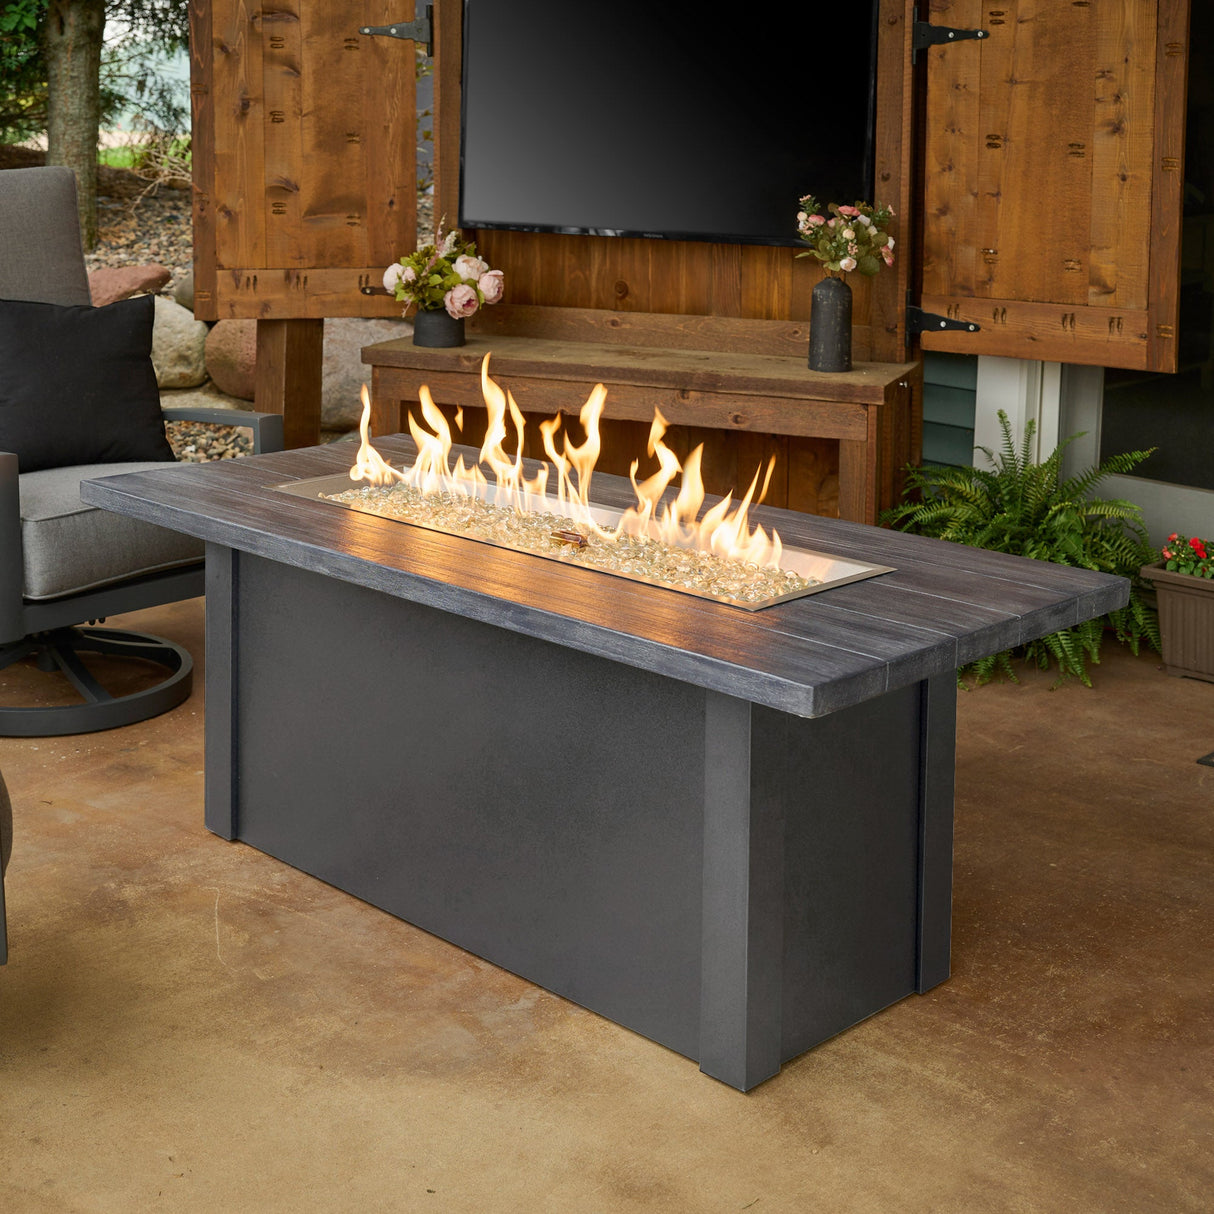 The Havenwood Linear Gas Fire Pit Table with a Carbon Grey top and Graphite Grey base in an outdoor space next to patio furniture